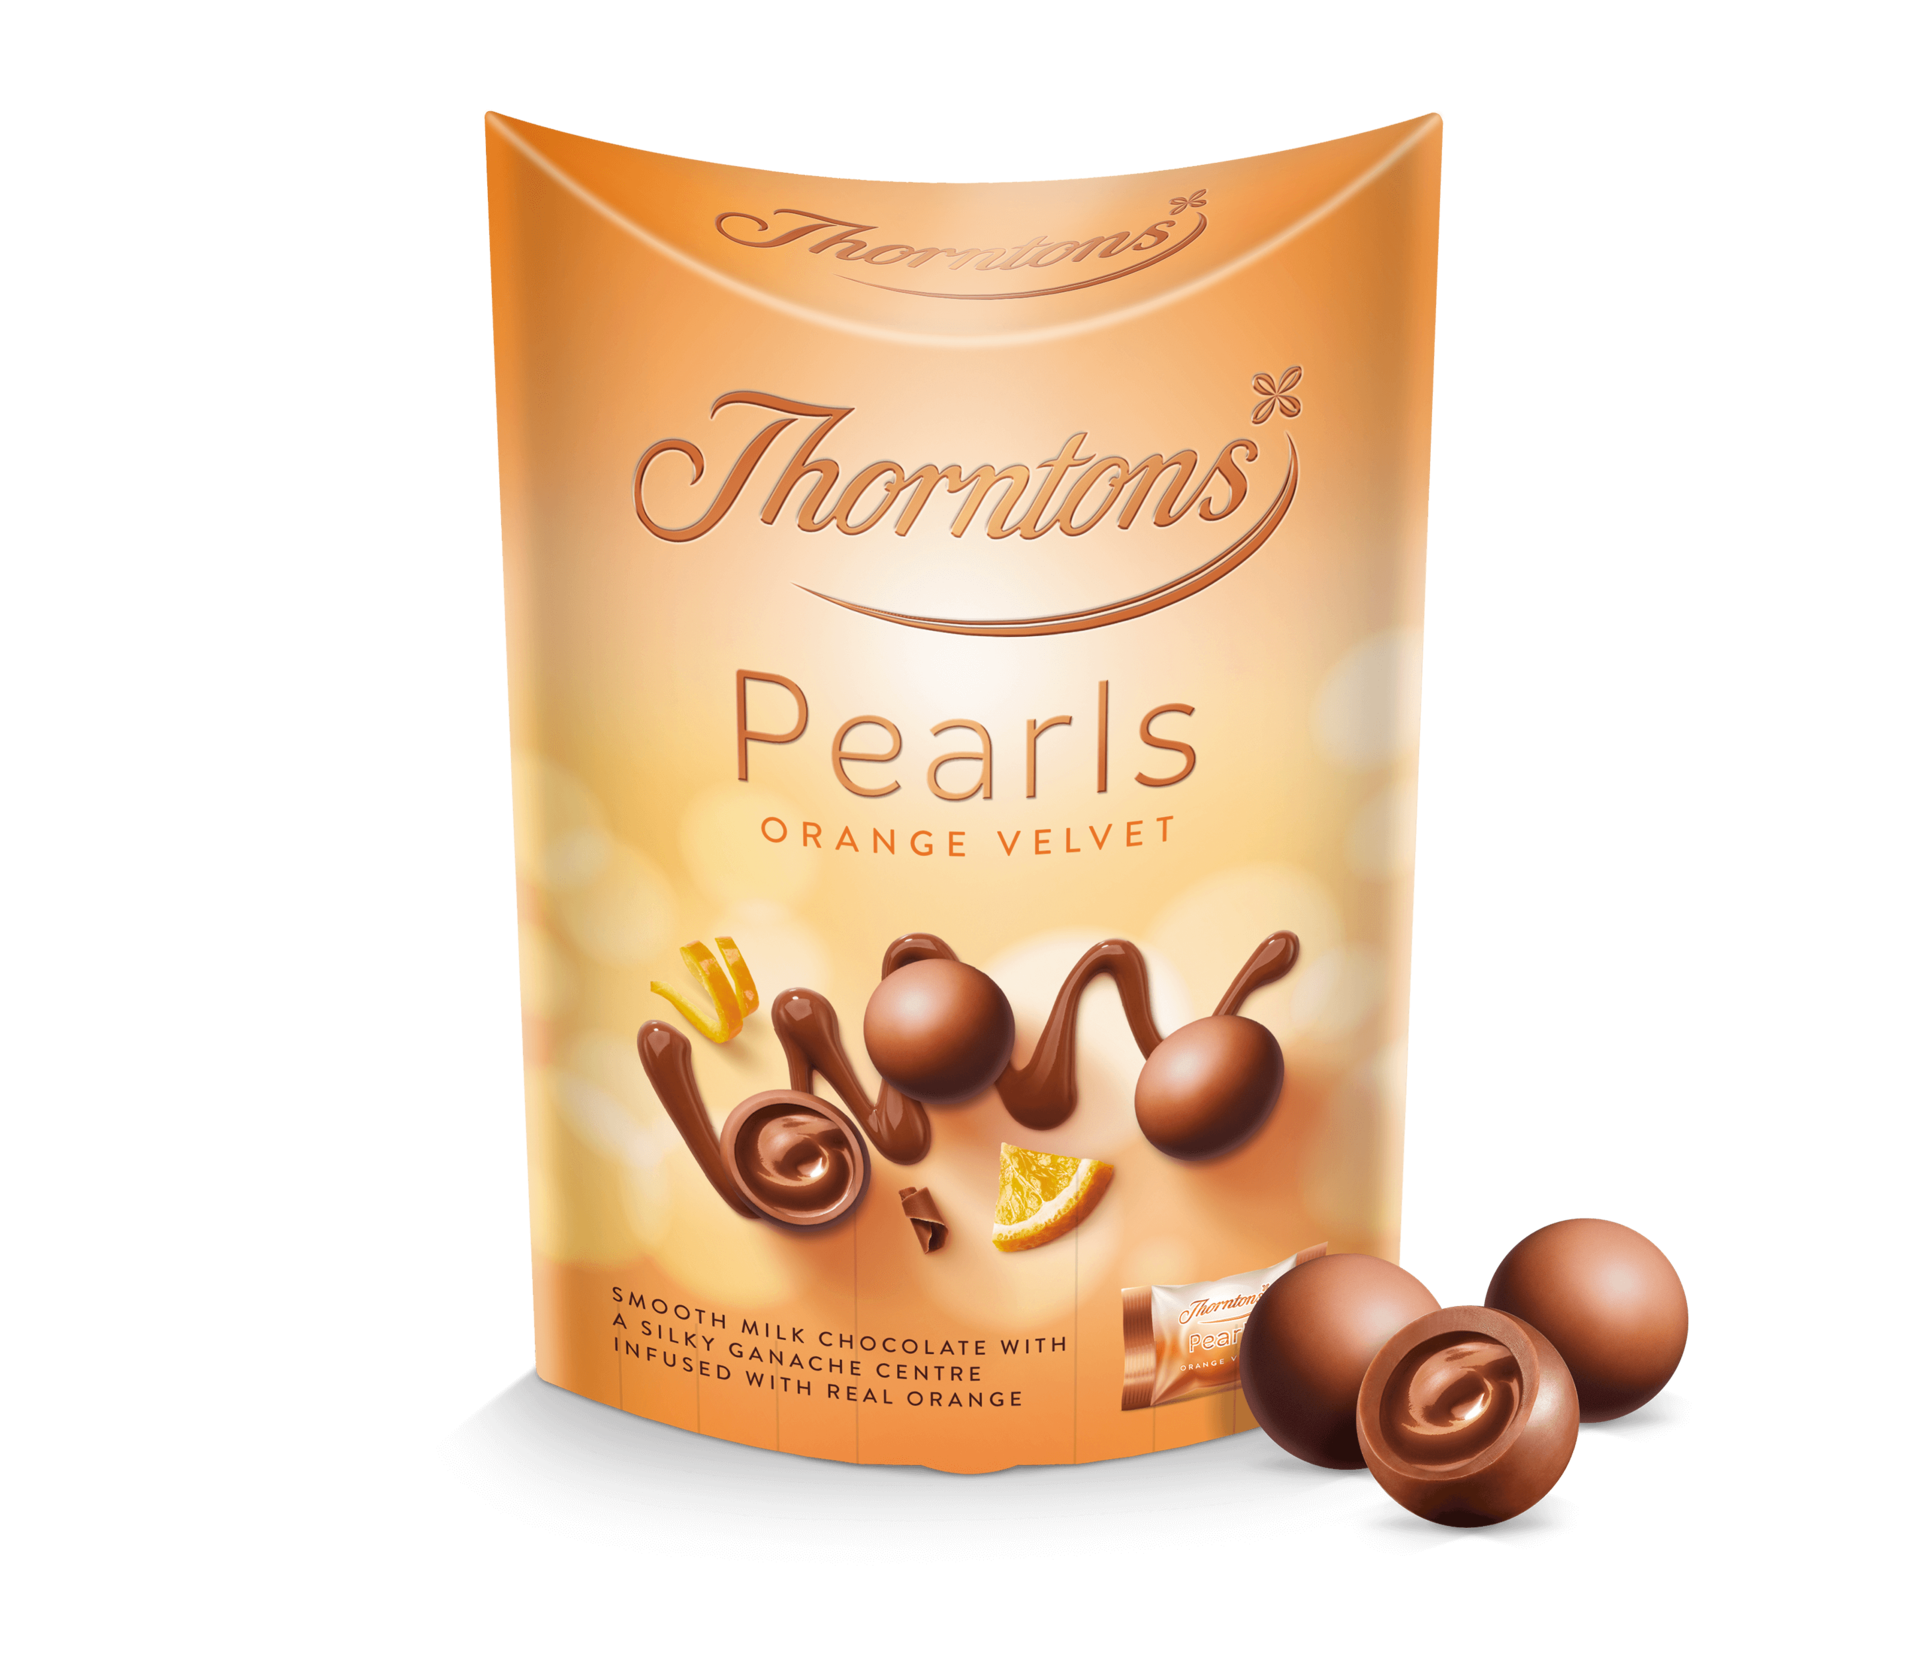 https://www.thorntons.com/medias/sys_master/images/h12/hde/10467820896286/77245563_main/77245563-main.png?resize=xs-s-xs